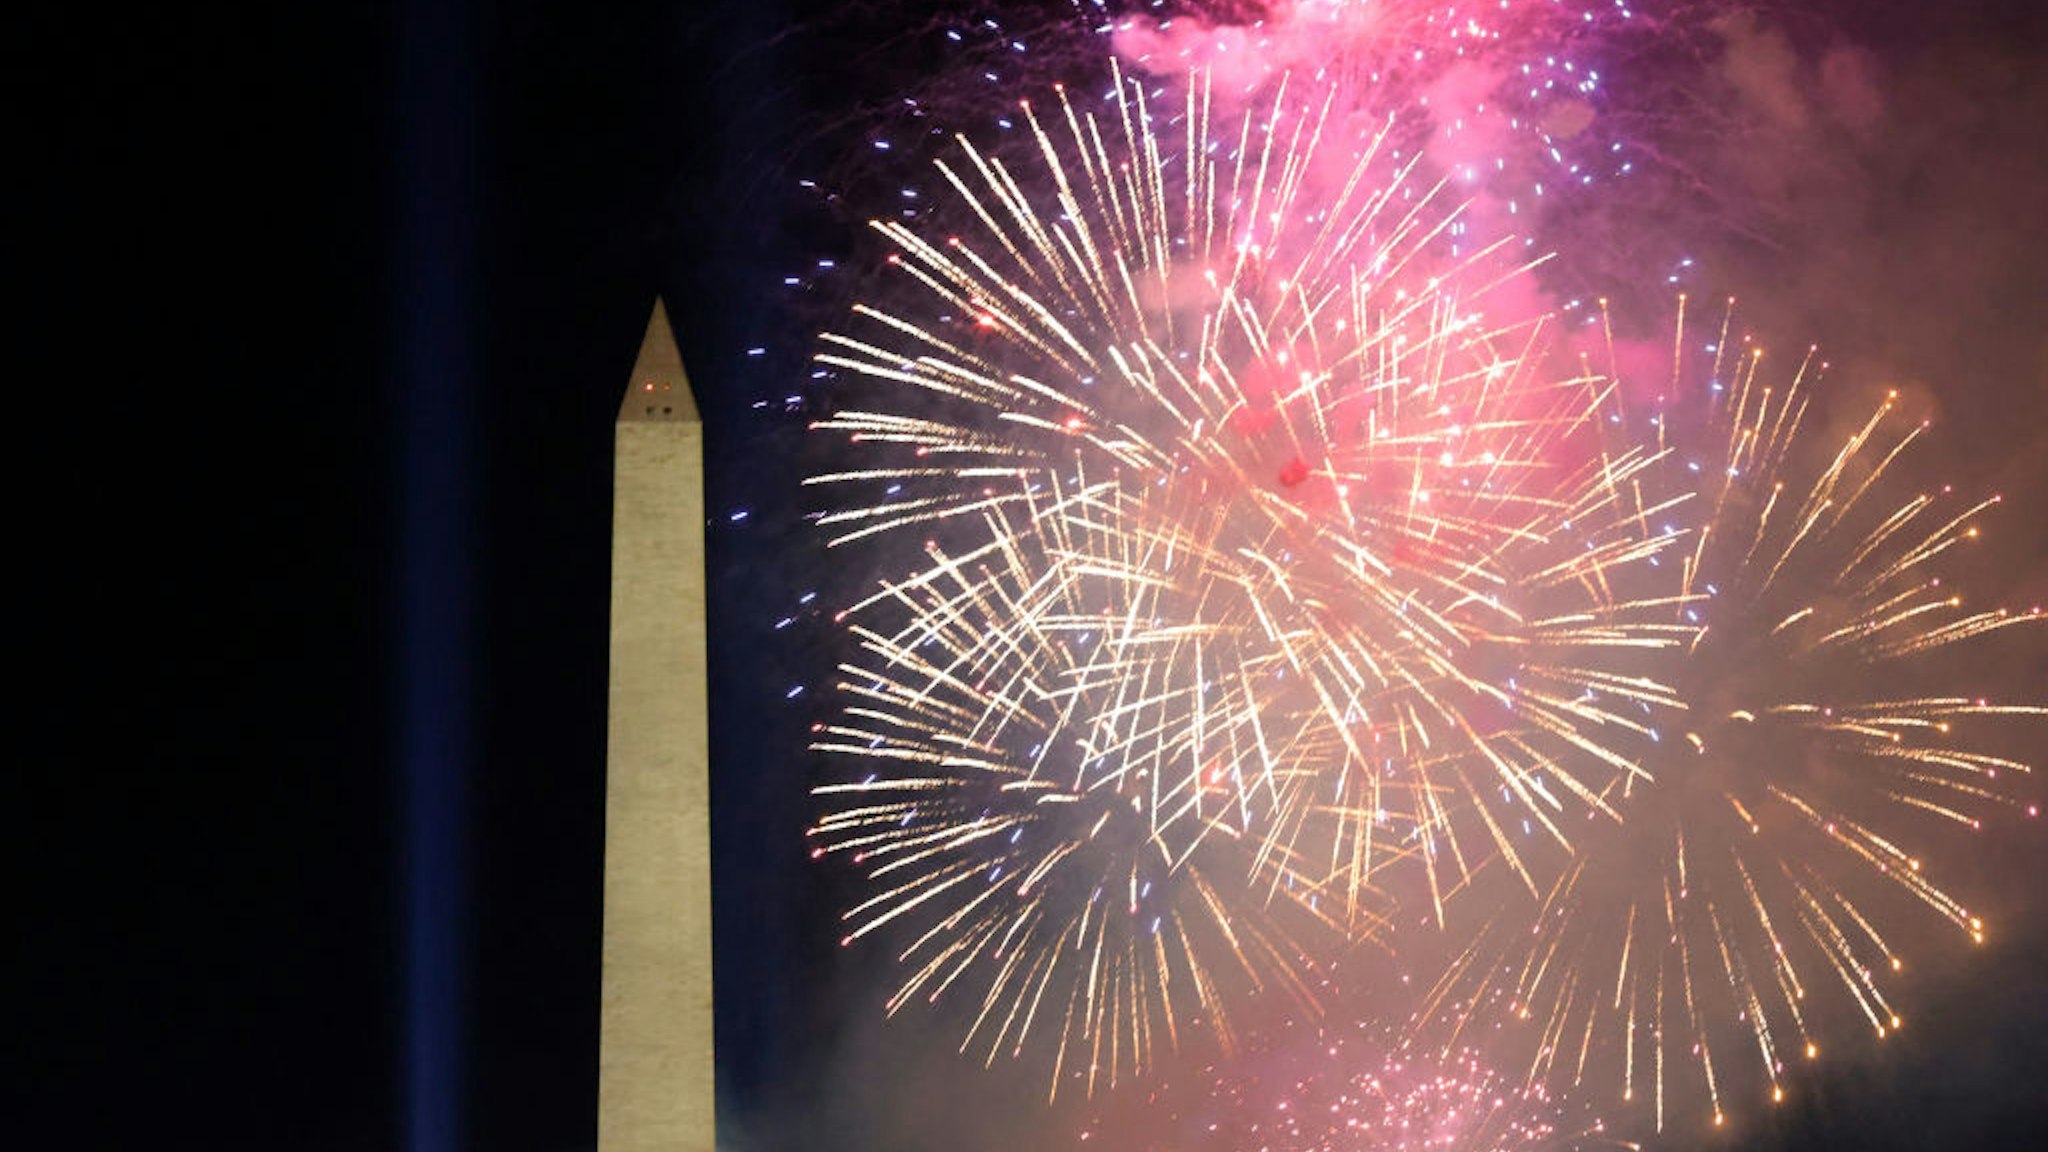 WASHINGTON, DC - JANUARY 20: Fireworks detonate about the Washington Monument during an Inauguration Day event at the Lincoln Memorial on January 20, 2021 in Washington, DC. President Joe Biden and Vice President Kamala Harris were sworn in today. (Photo by Justin Sullivan/Getty Images)